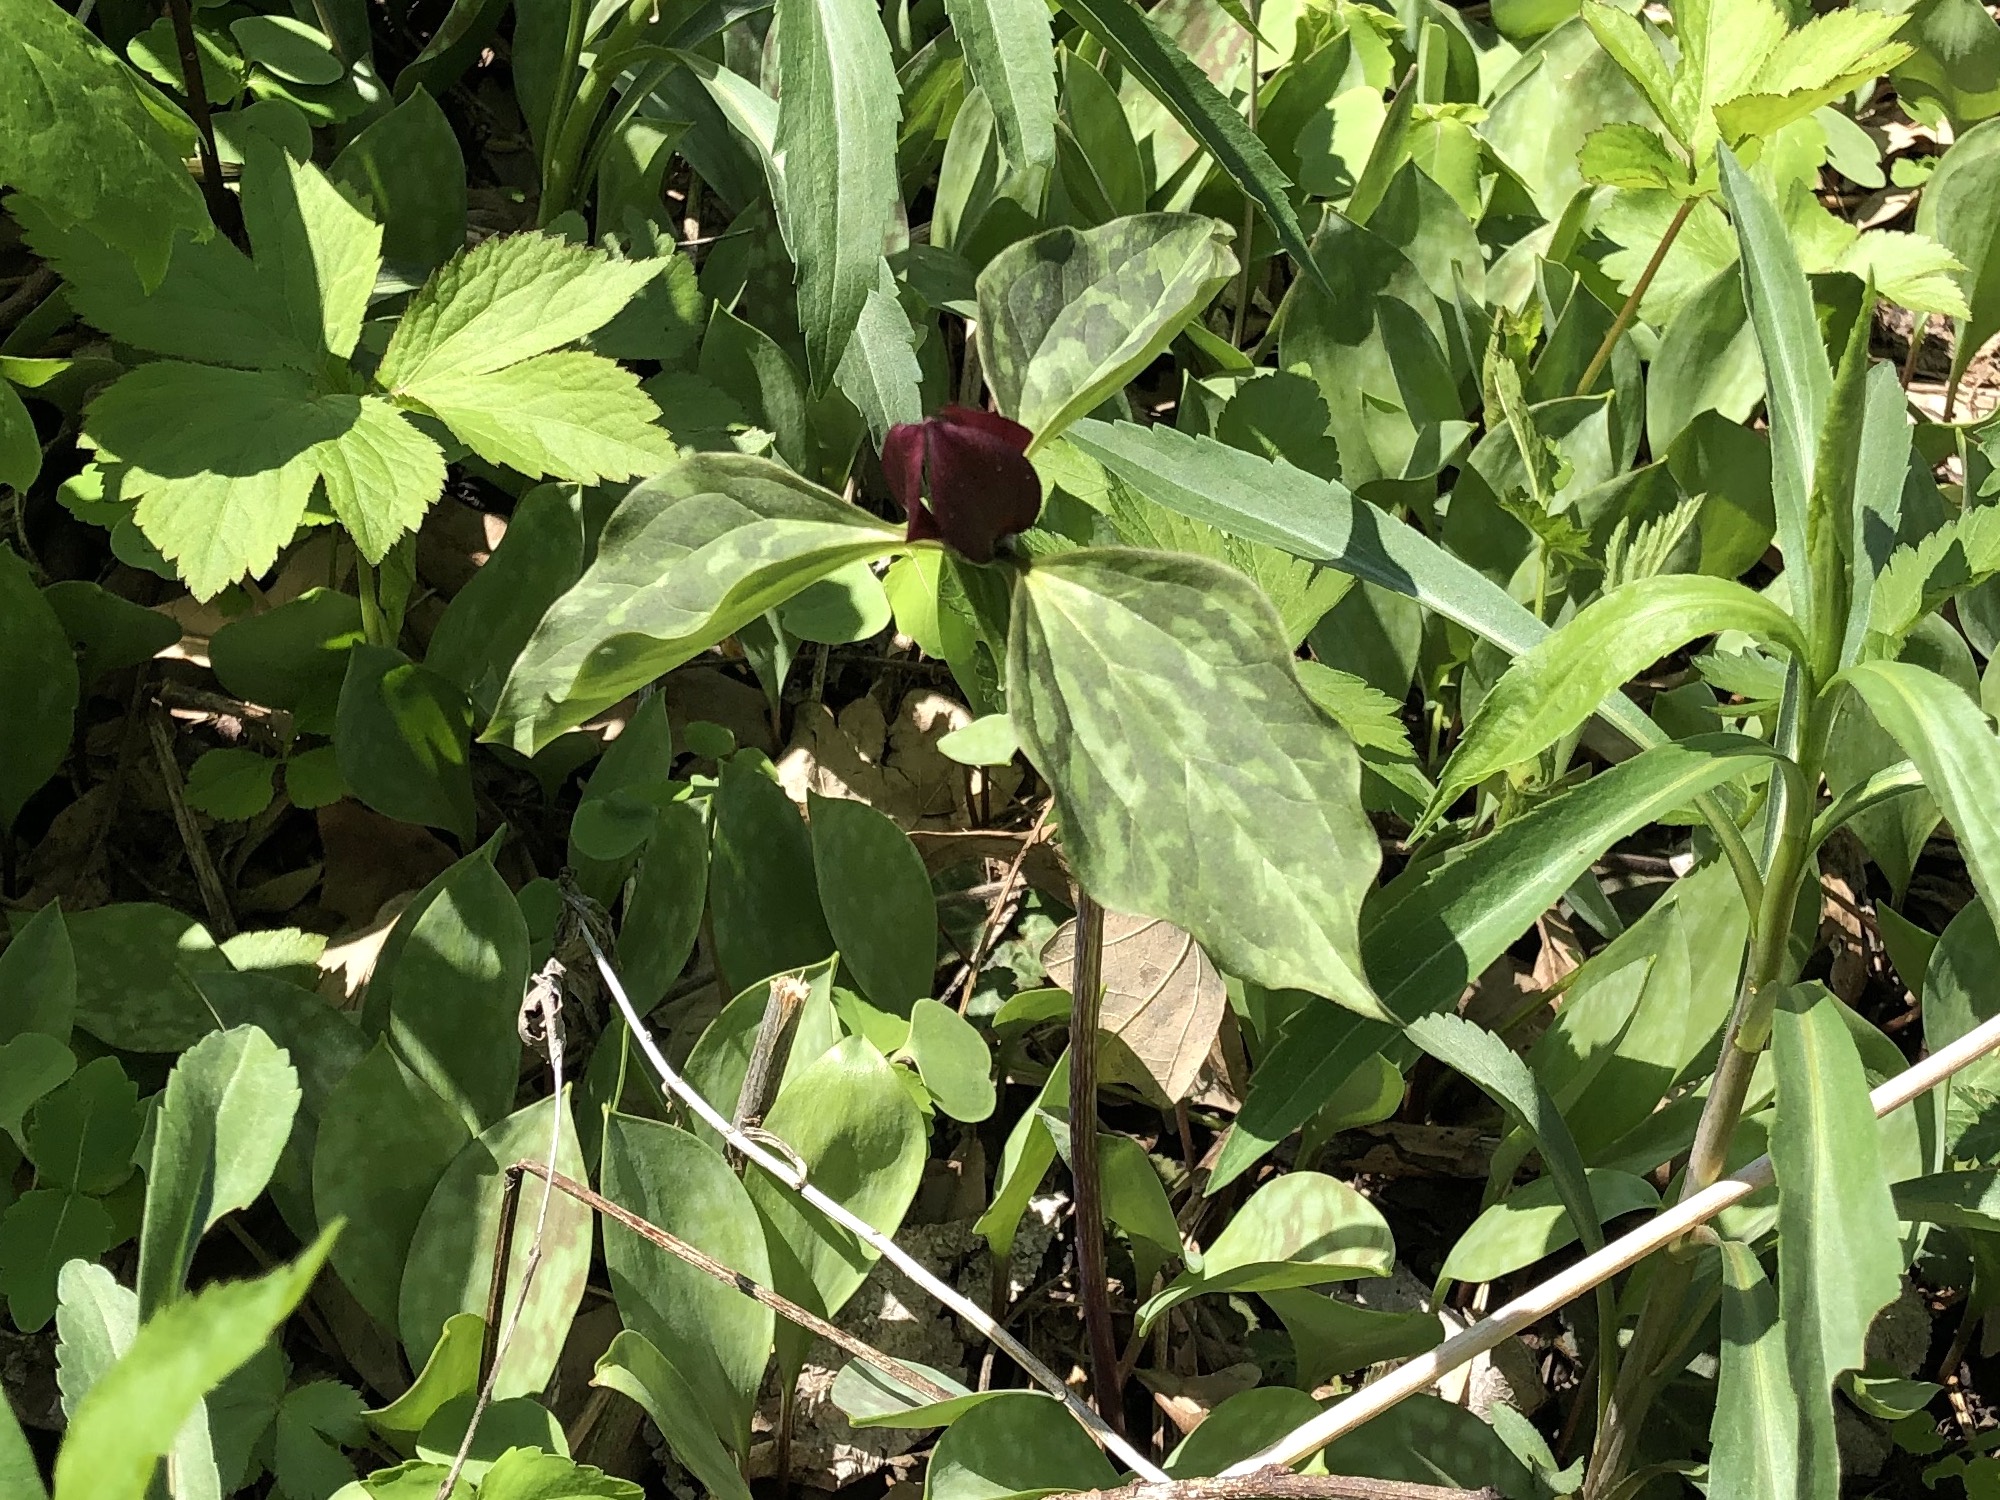 Trillium near Council Ring in Madison, Wisconsin on May 5, 2019.